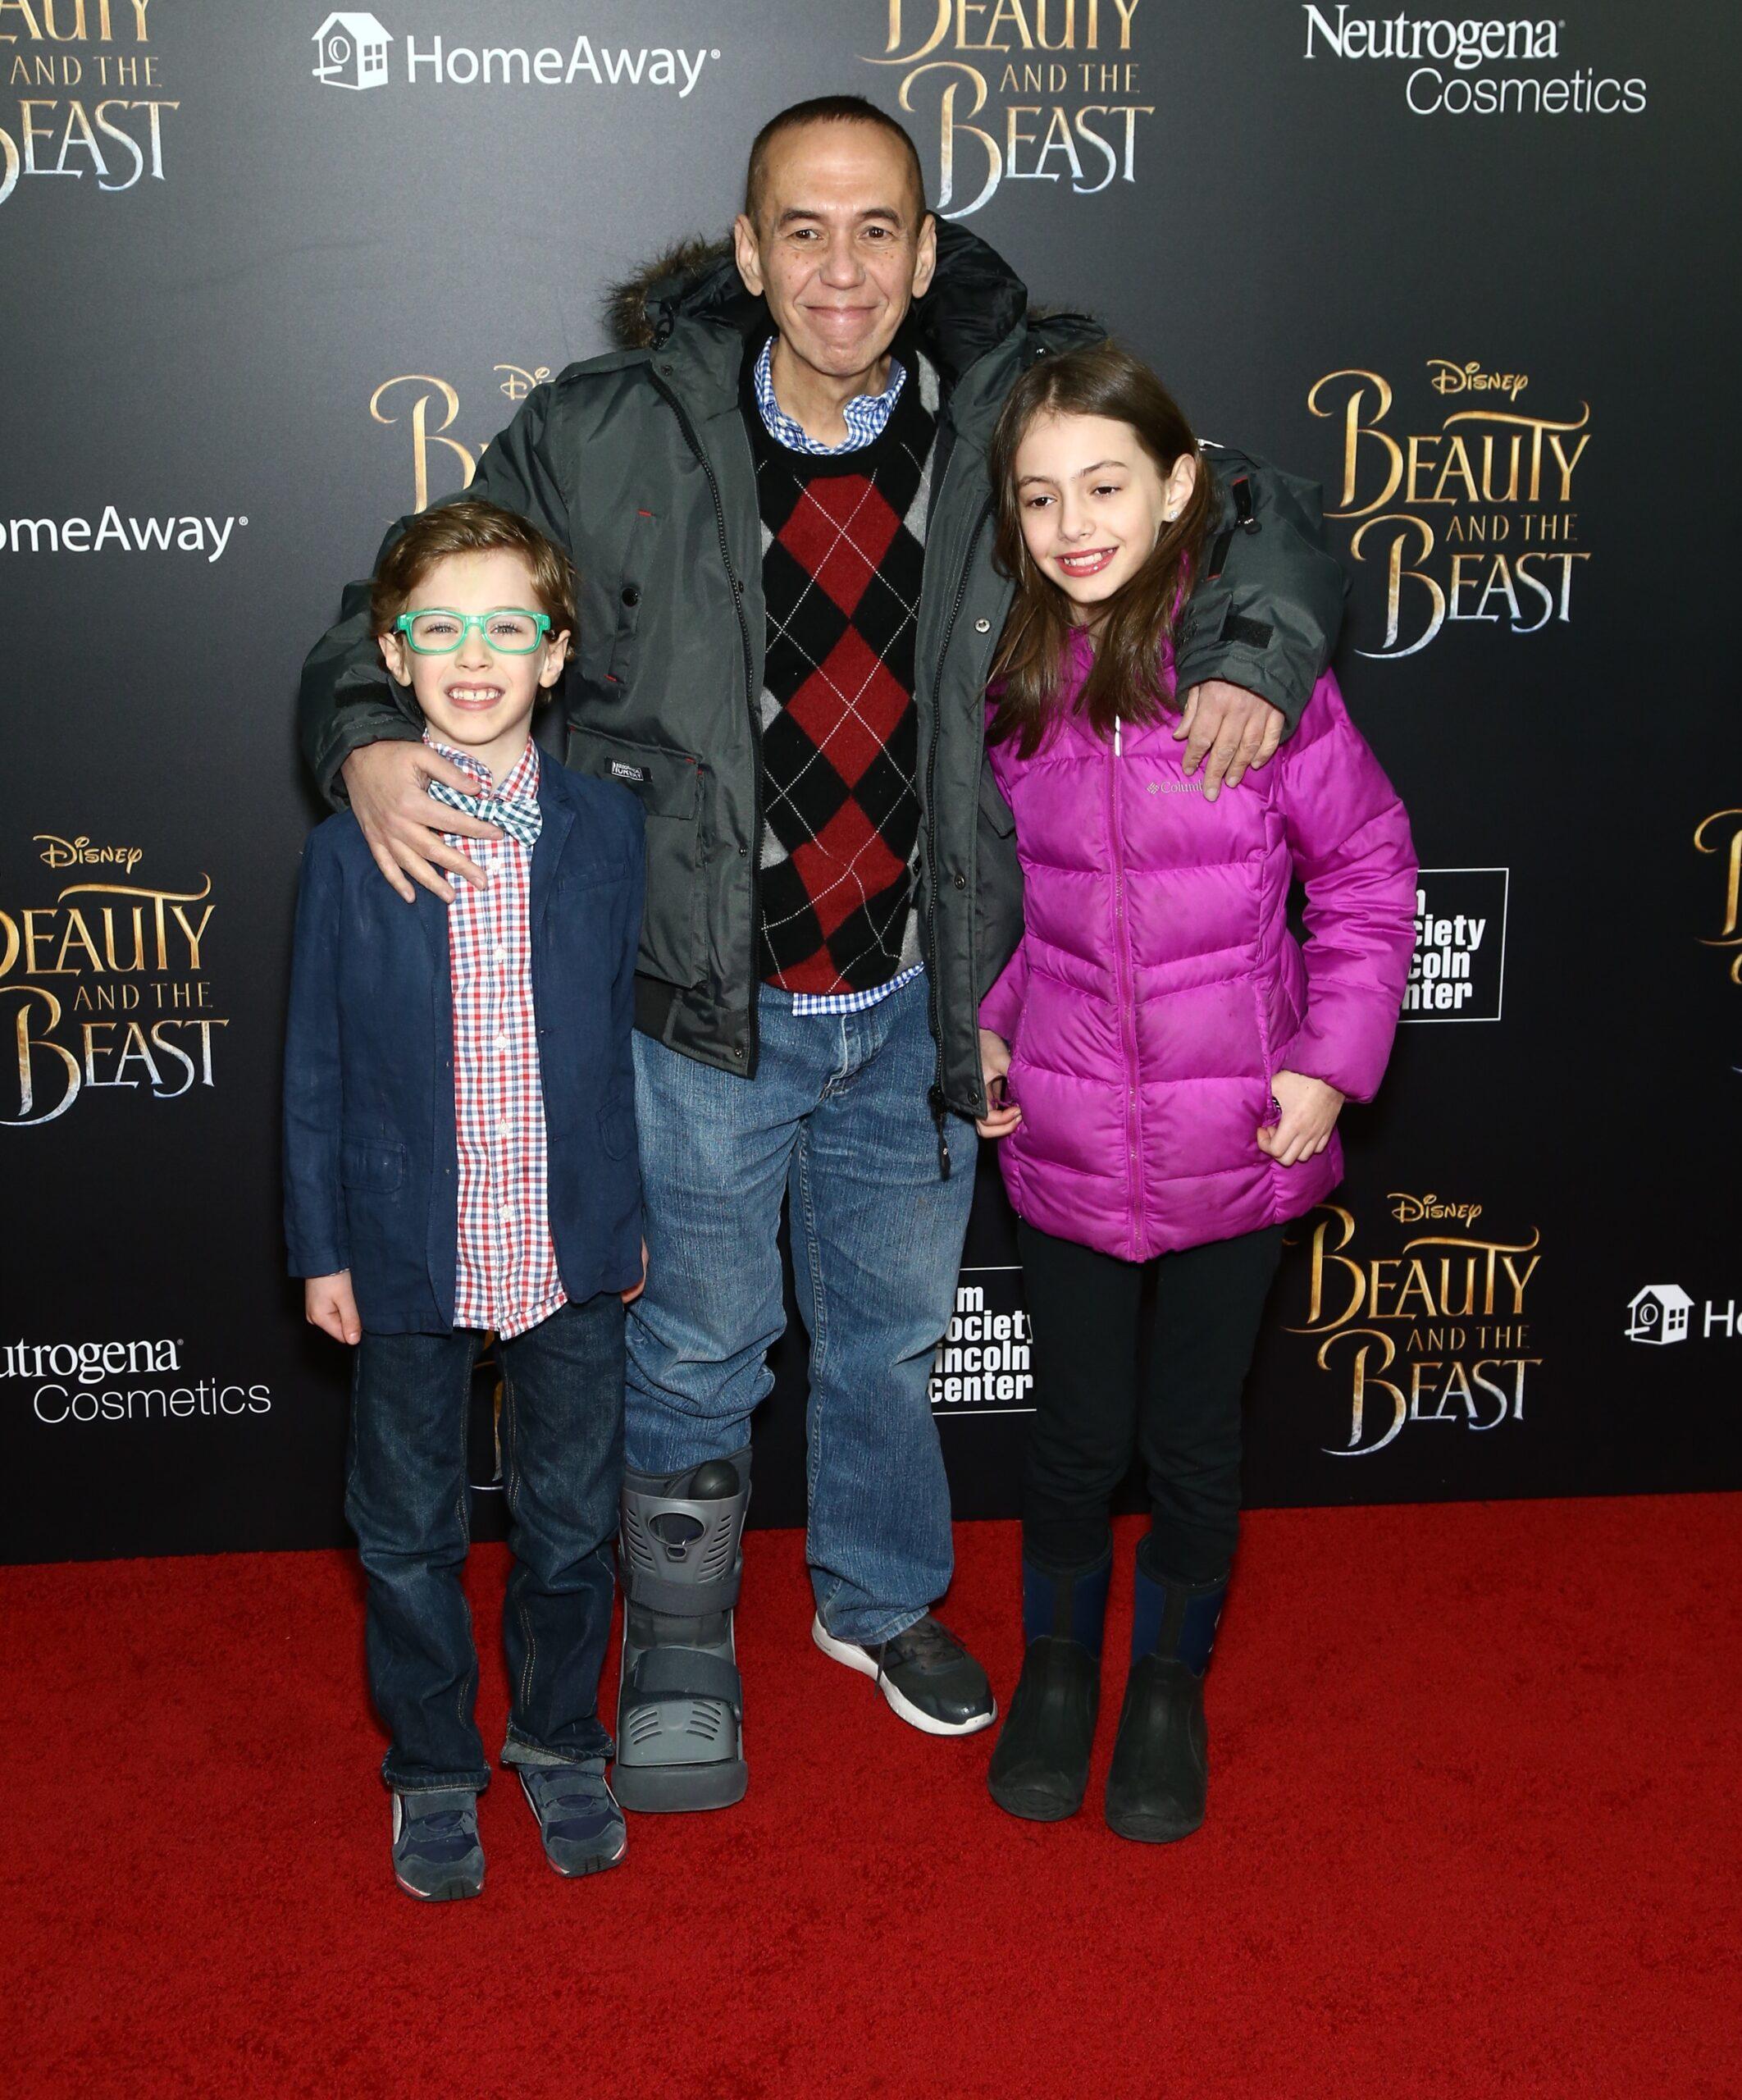 Beauty And The Beast' Screening in NYC